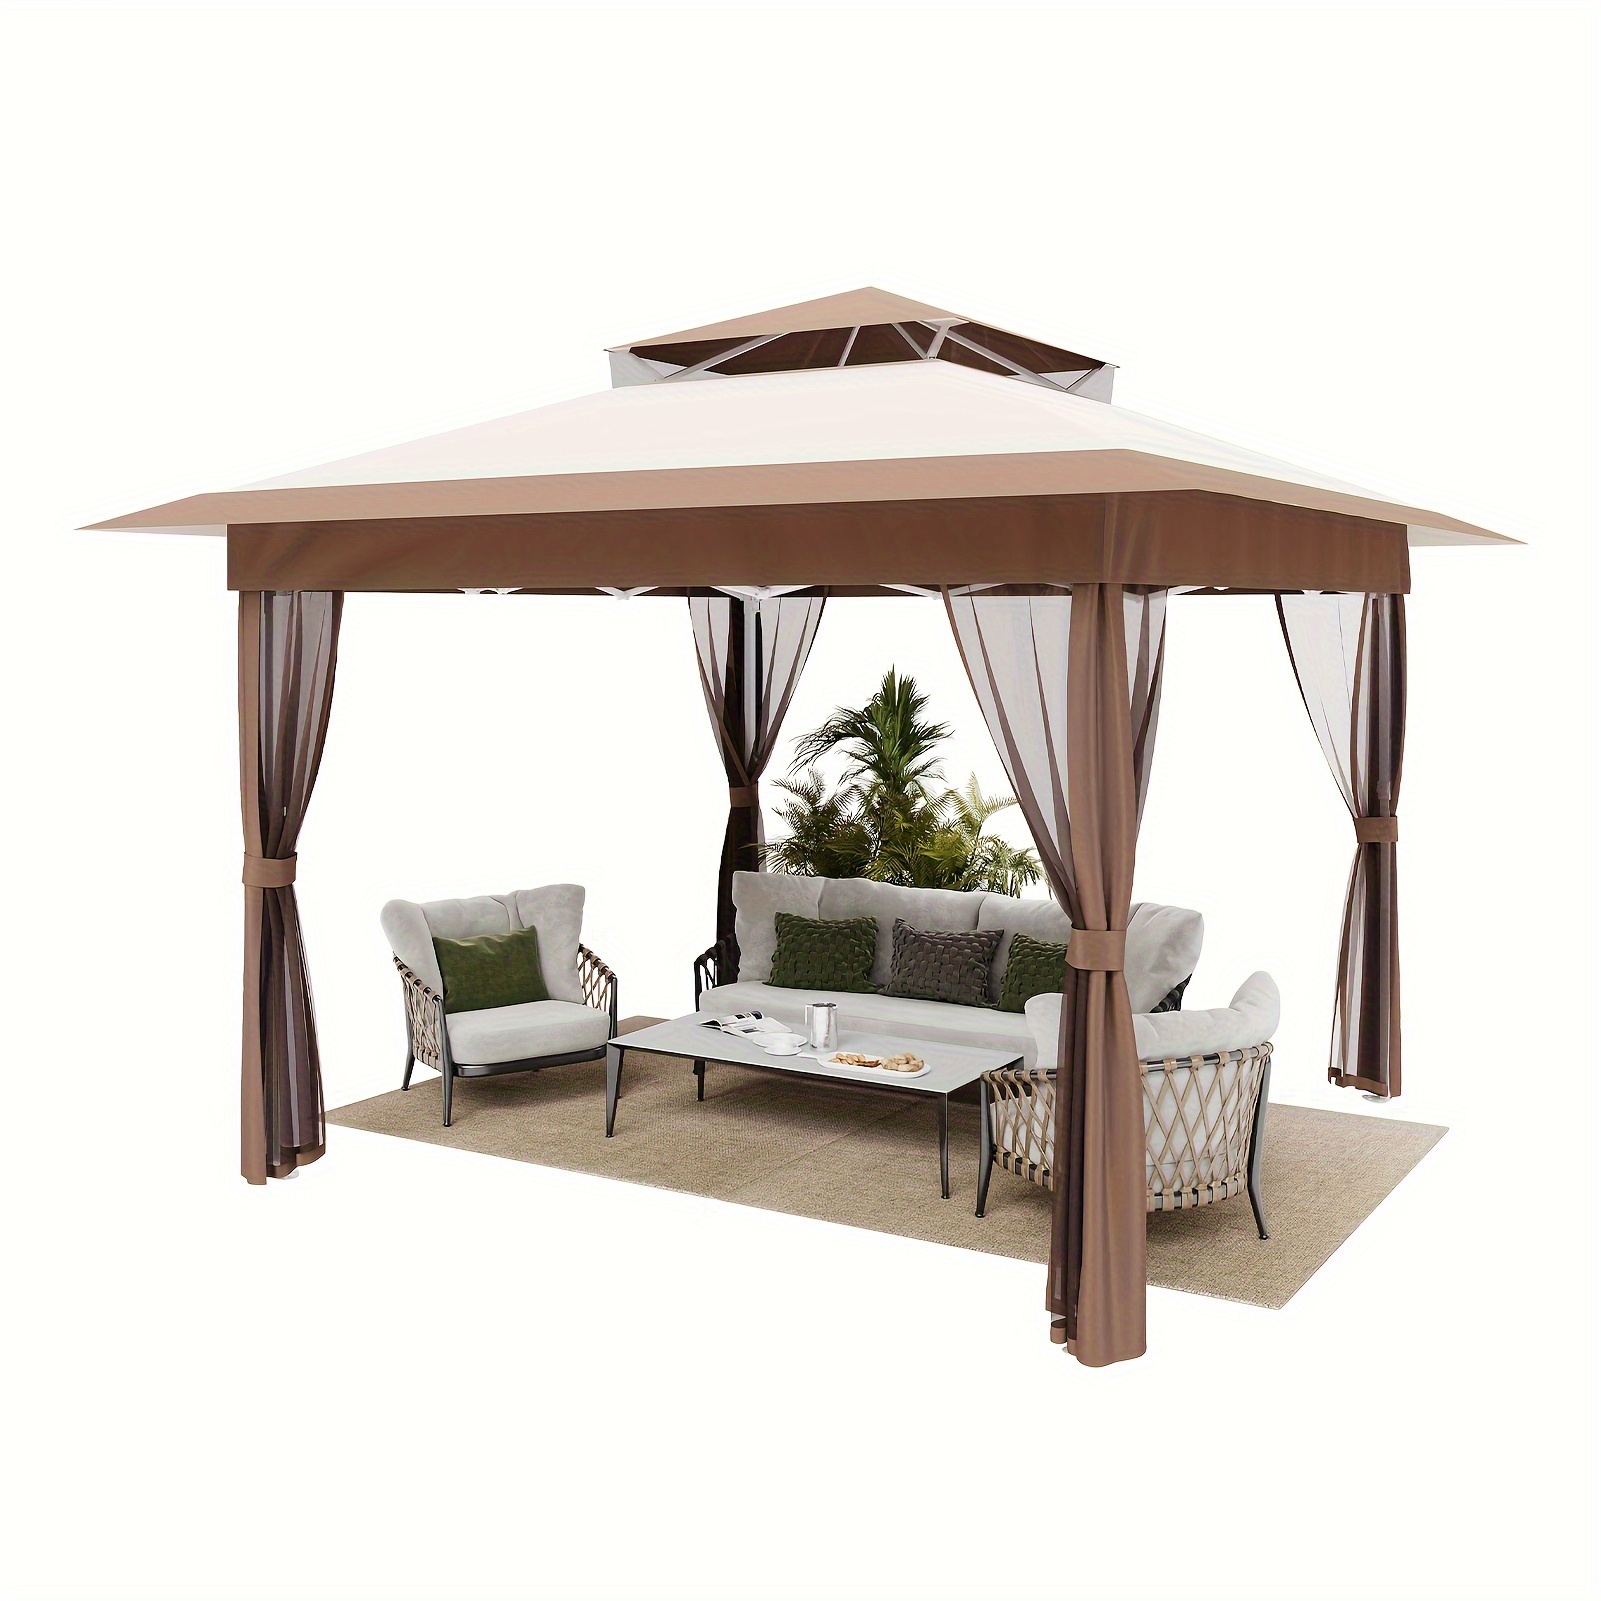 

Pop Up Gazebo Patio Gazebo 11x11 Outdoor Gazebo With Mosquito Netting Outdoor Canopy Shelter With Double Roof Ventilation 121 Square Feet Of Shade For Lawn, Garden, Backyard And Deck